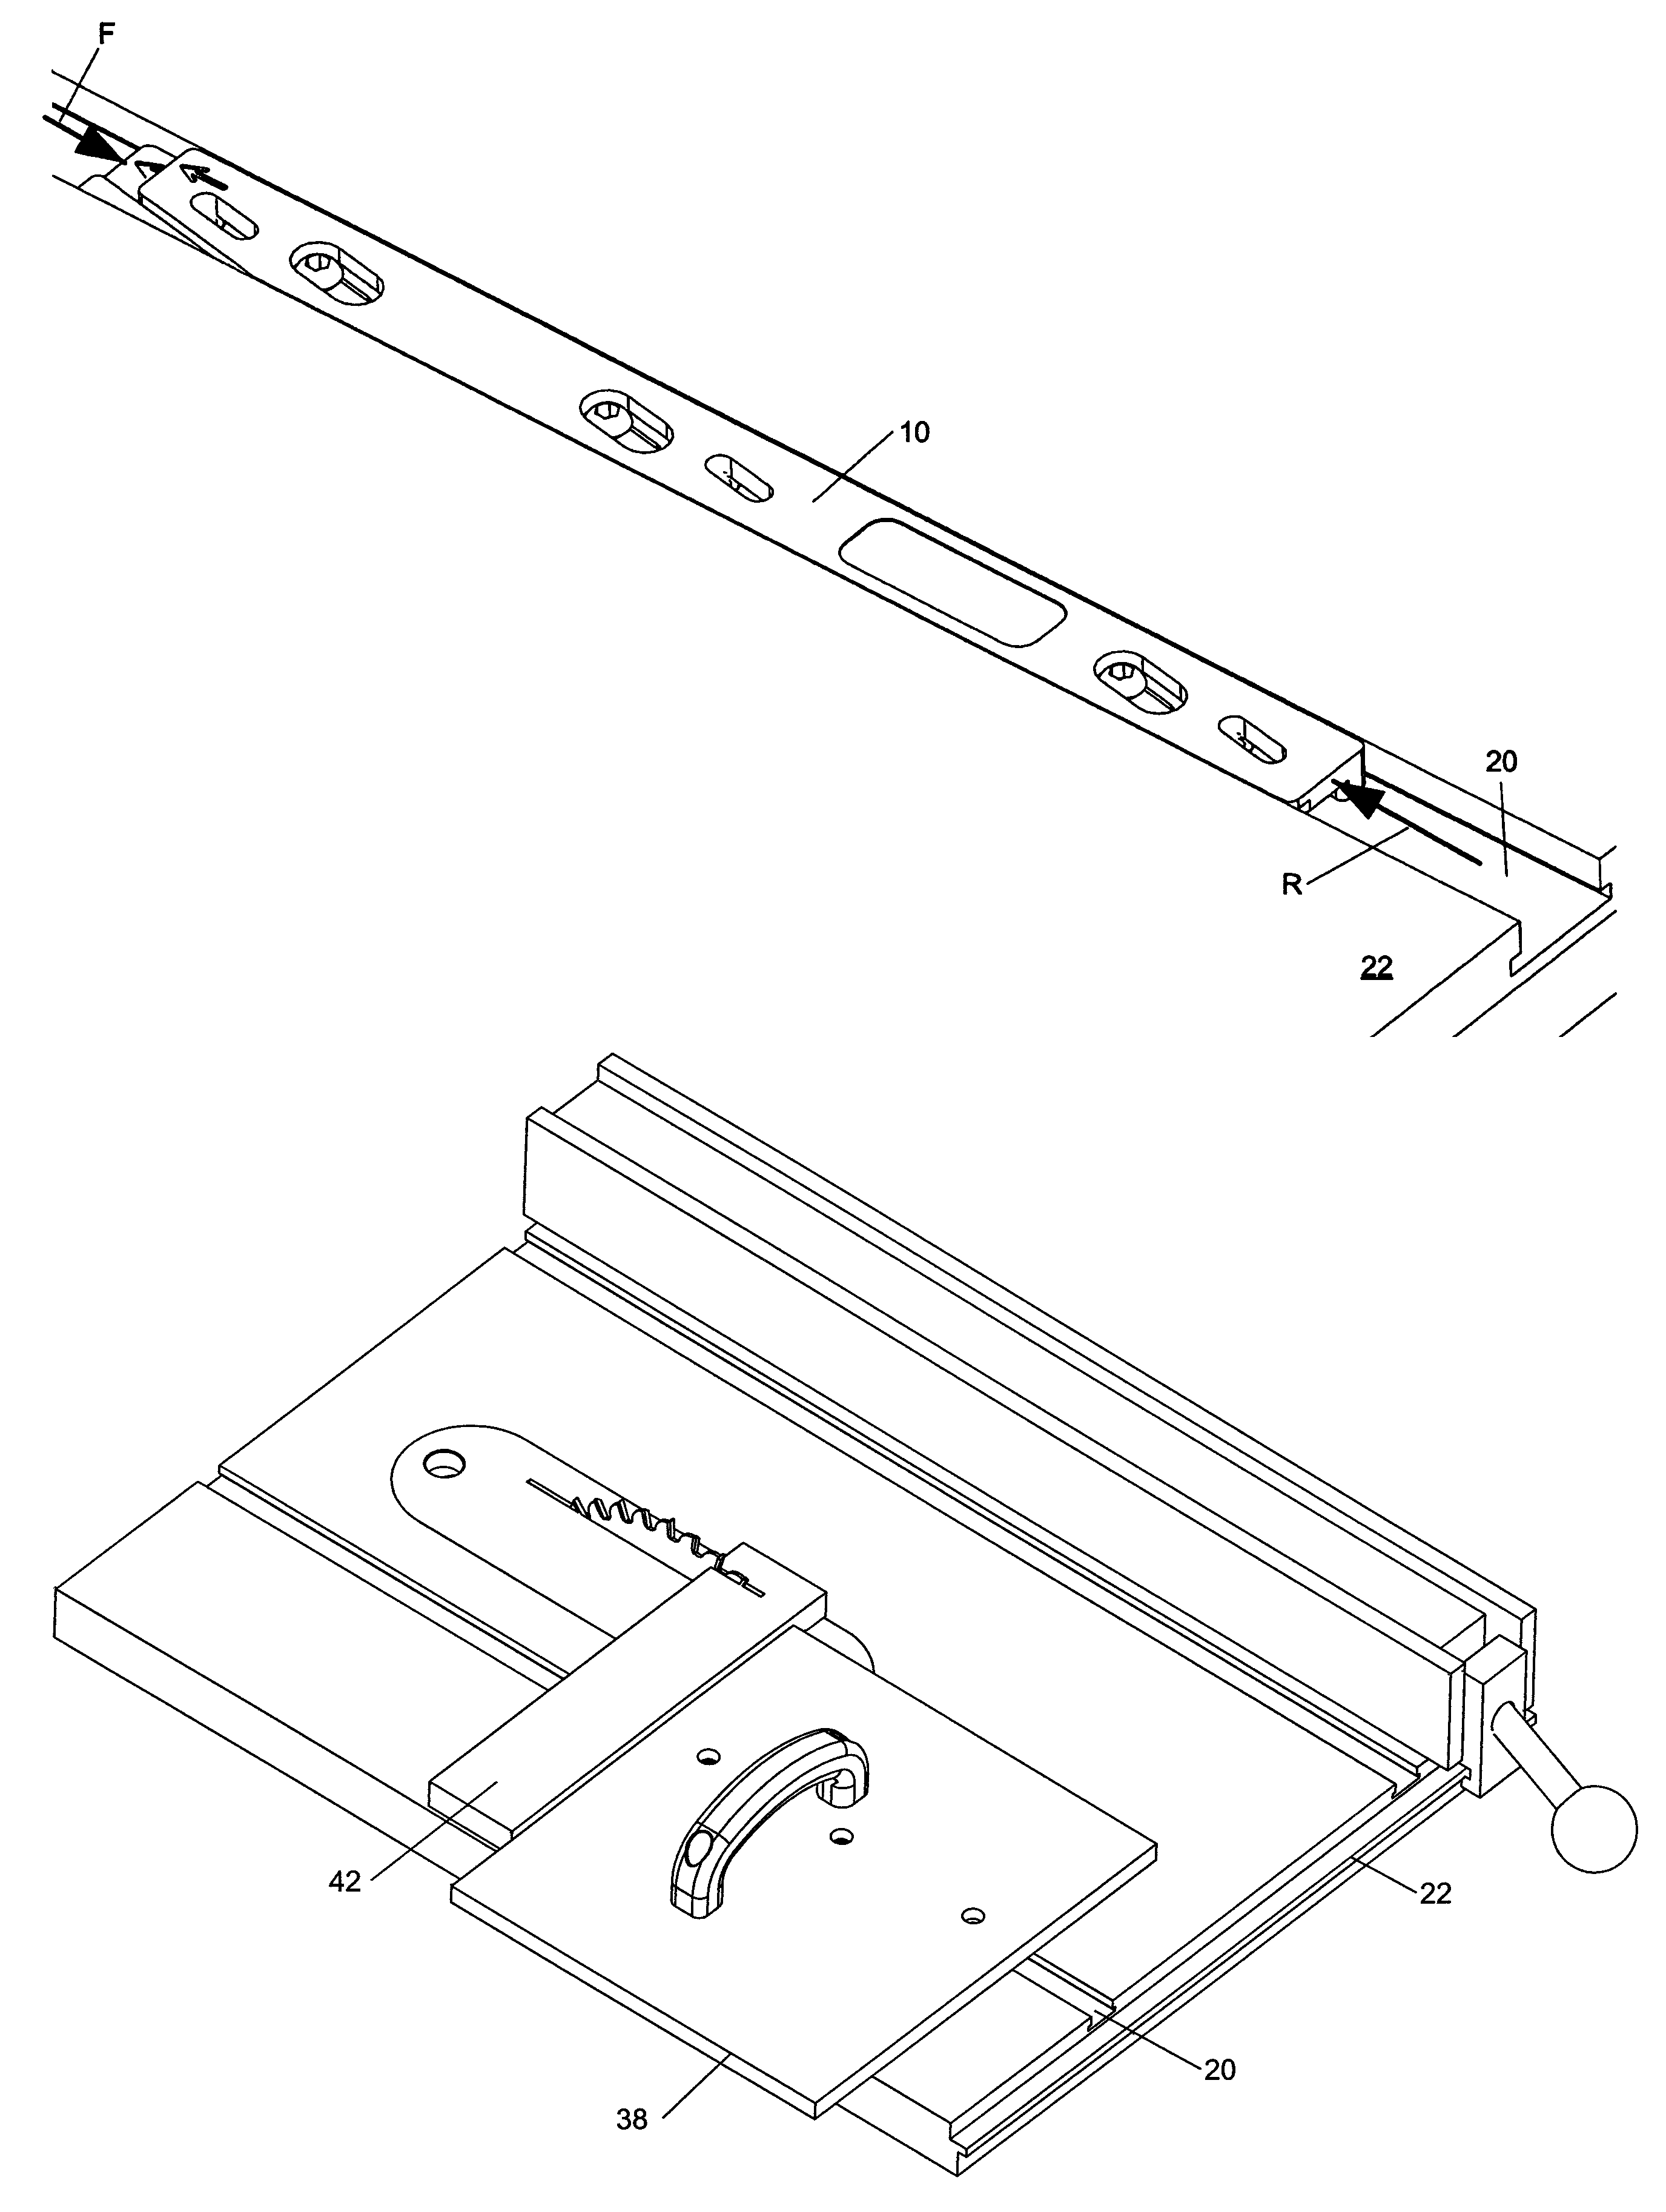 Adjustable guide bar for woodworking table slot